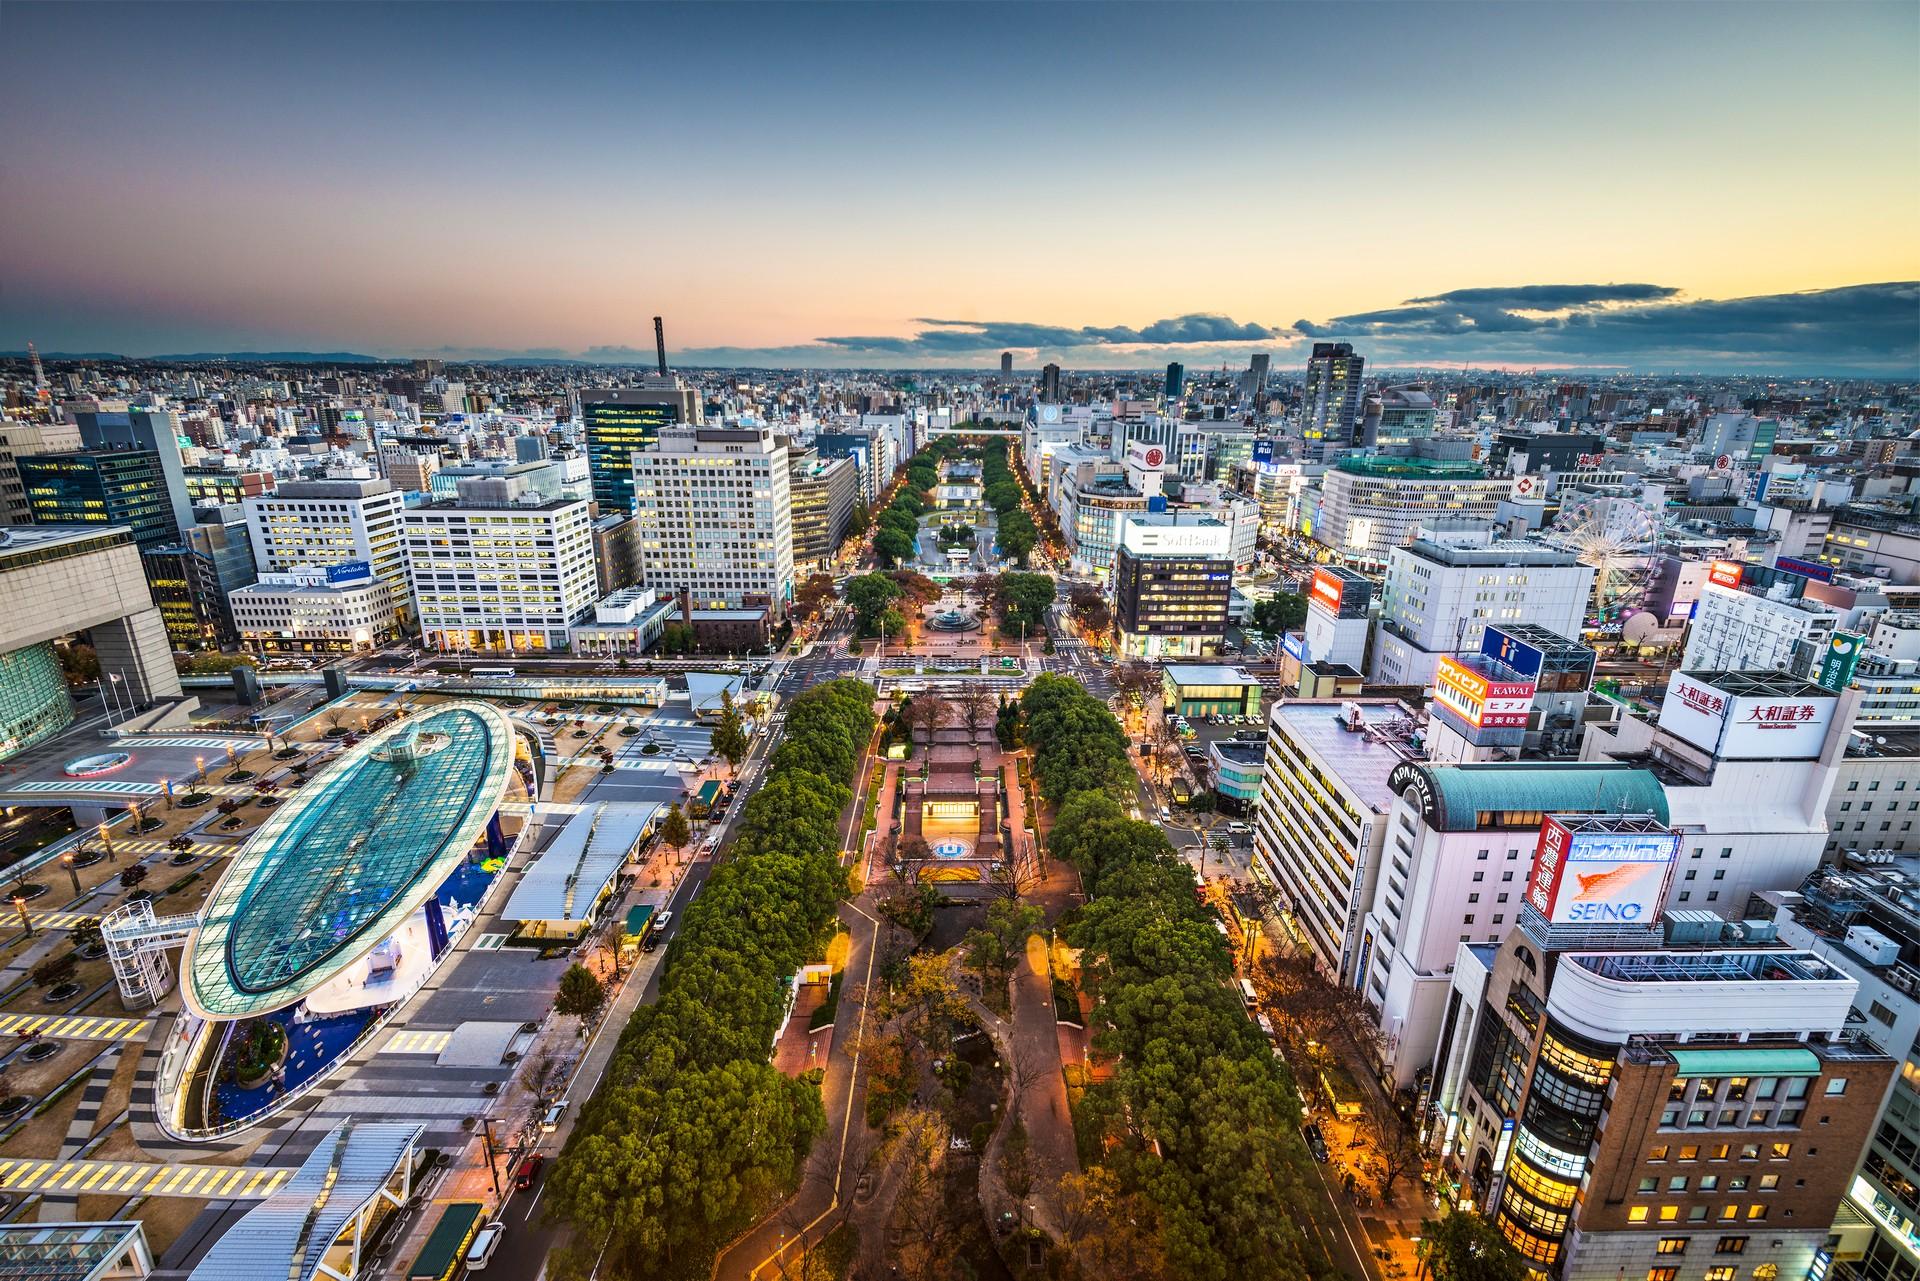 Aerial view of architecture in Nagoya at dawn